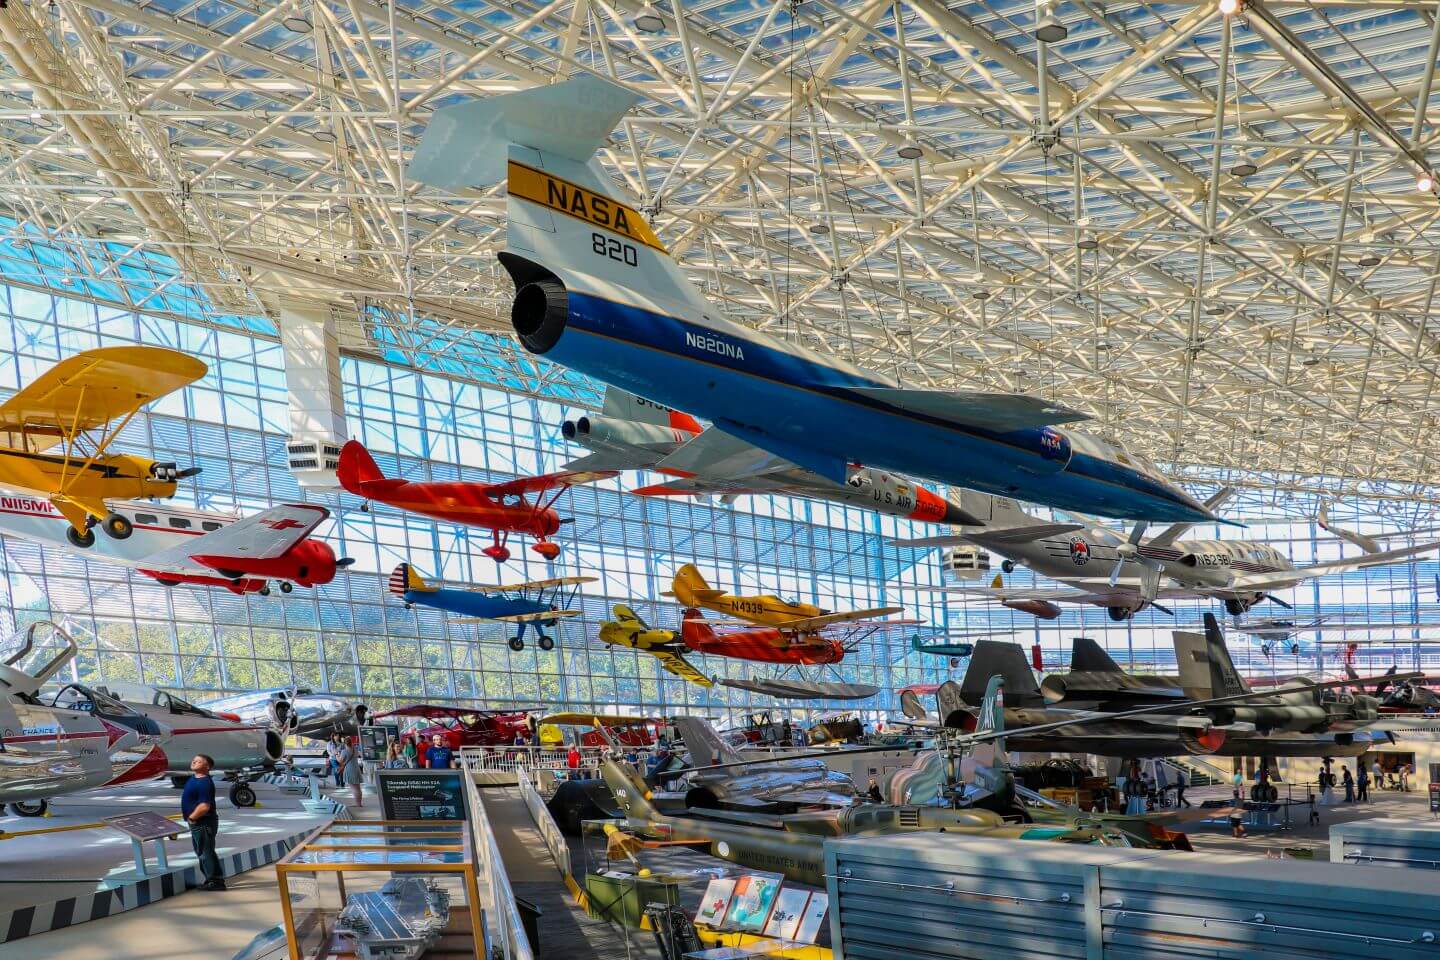 The Museum of Flight, Seattle